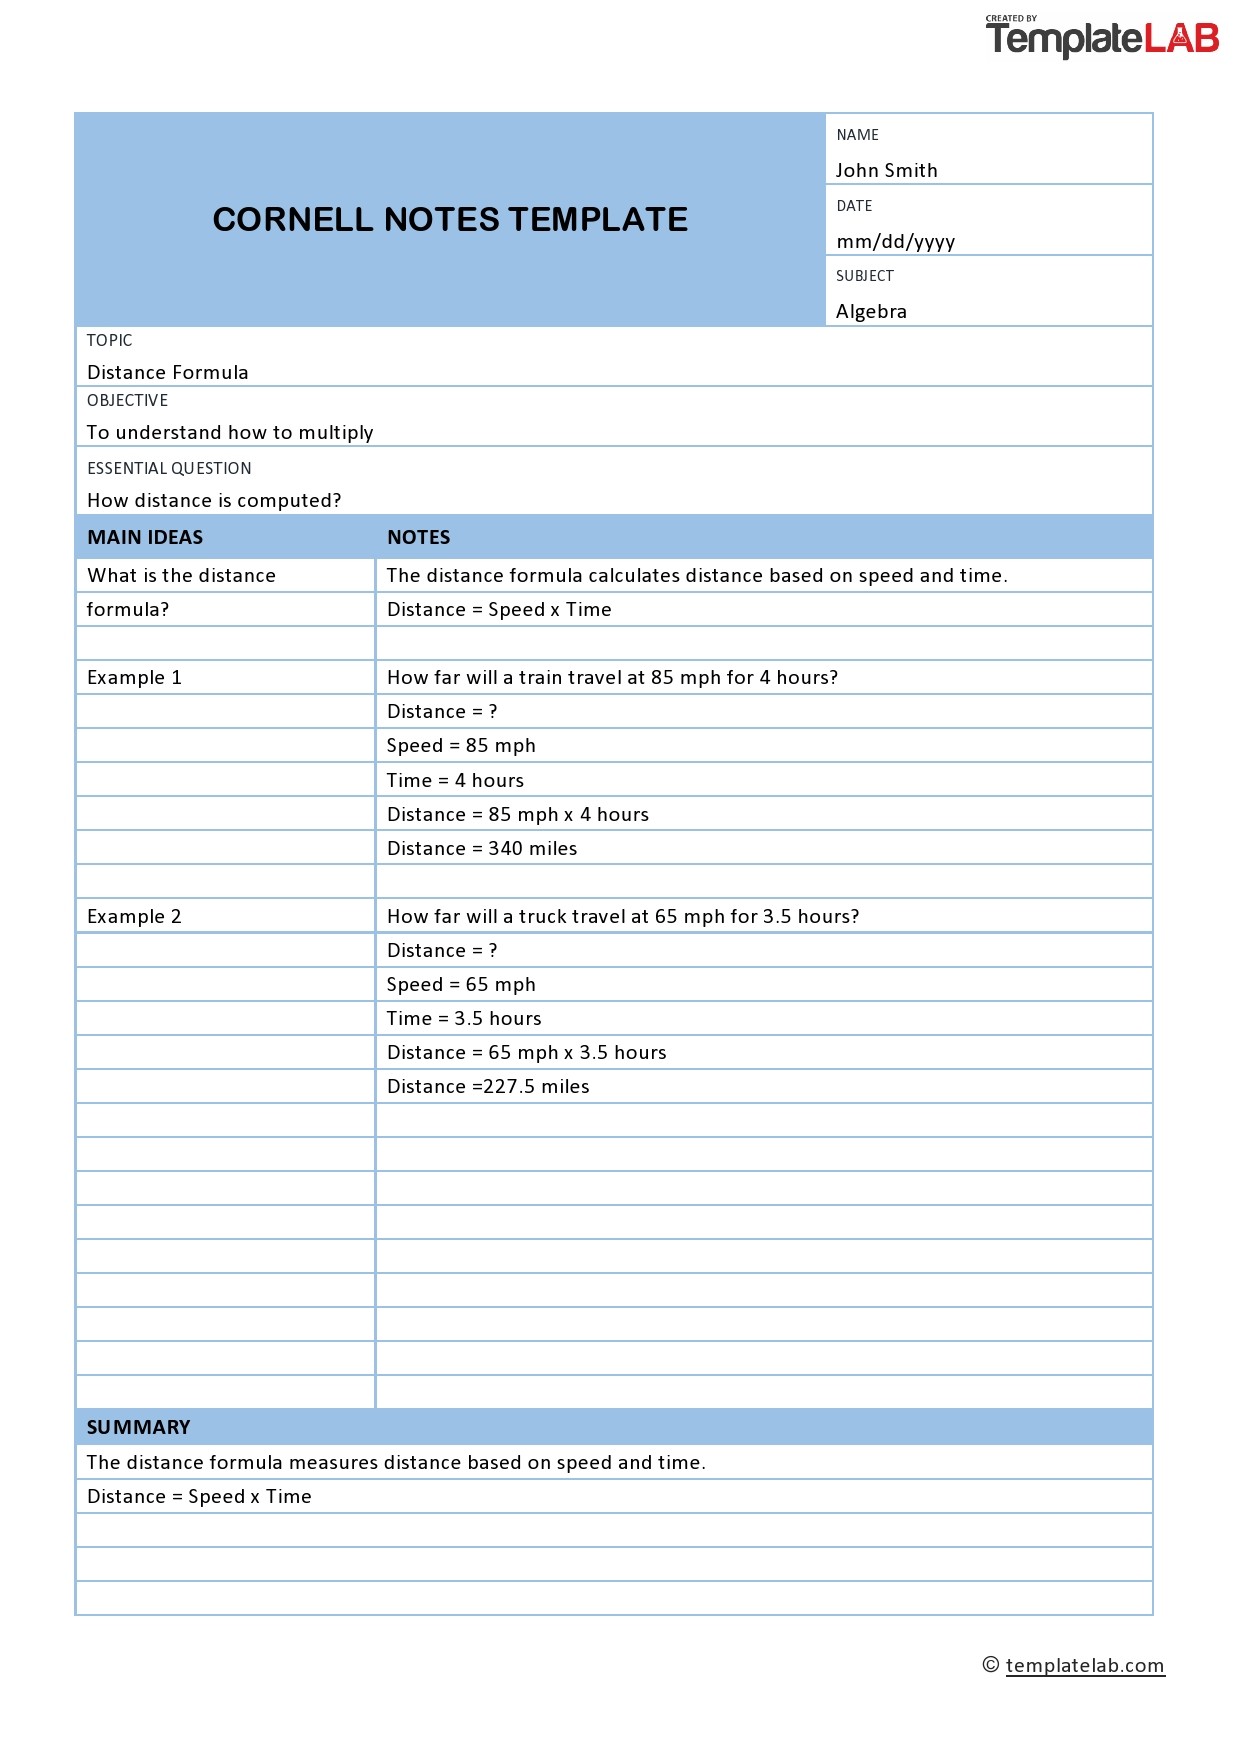 Free Cornell Notes Template 3 - TemplateLab